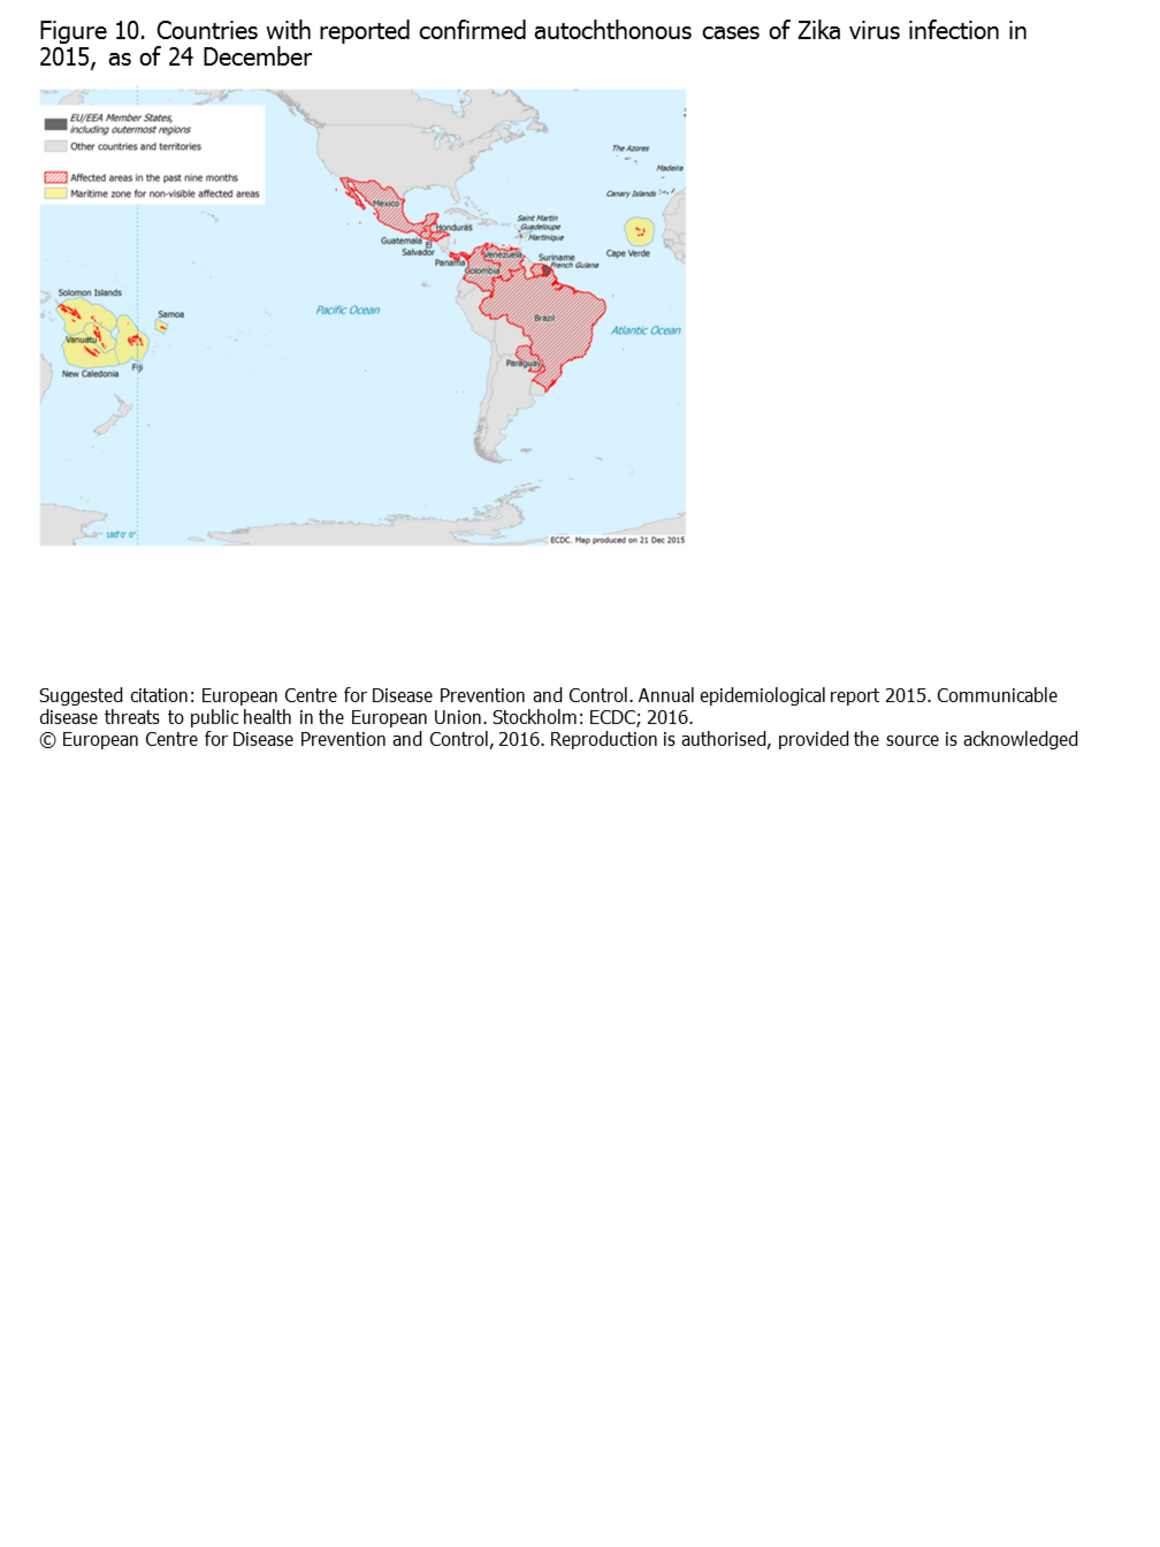 Countries with reported confirmed autochthonous cases of Zika virus infection in 2015, as of 24 December 2015